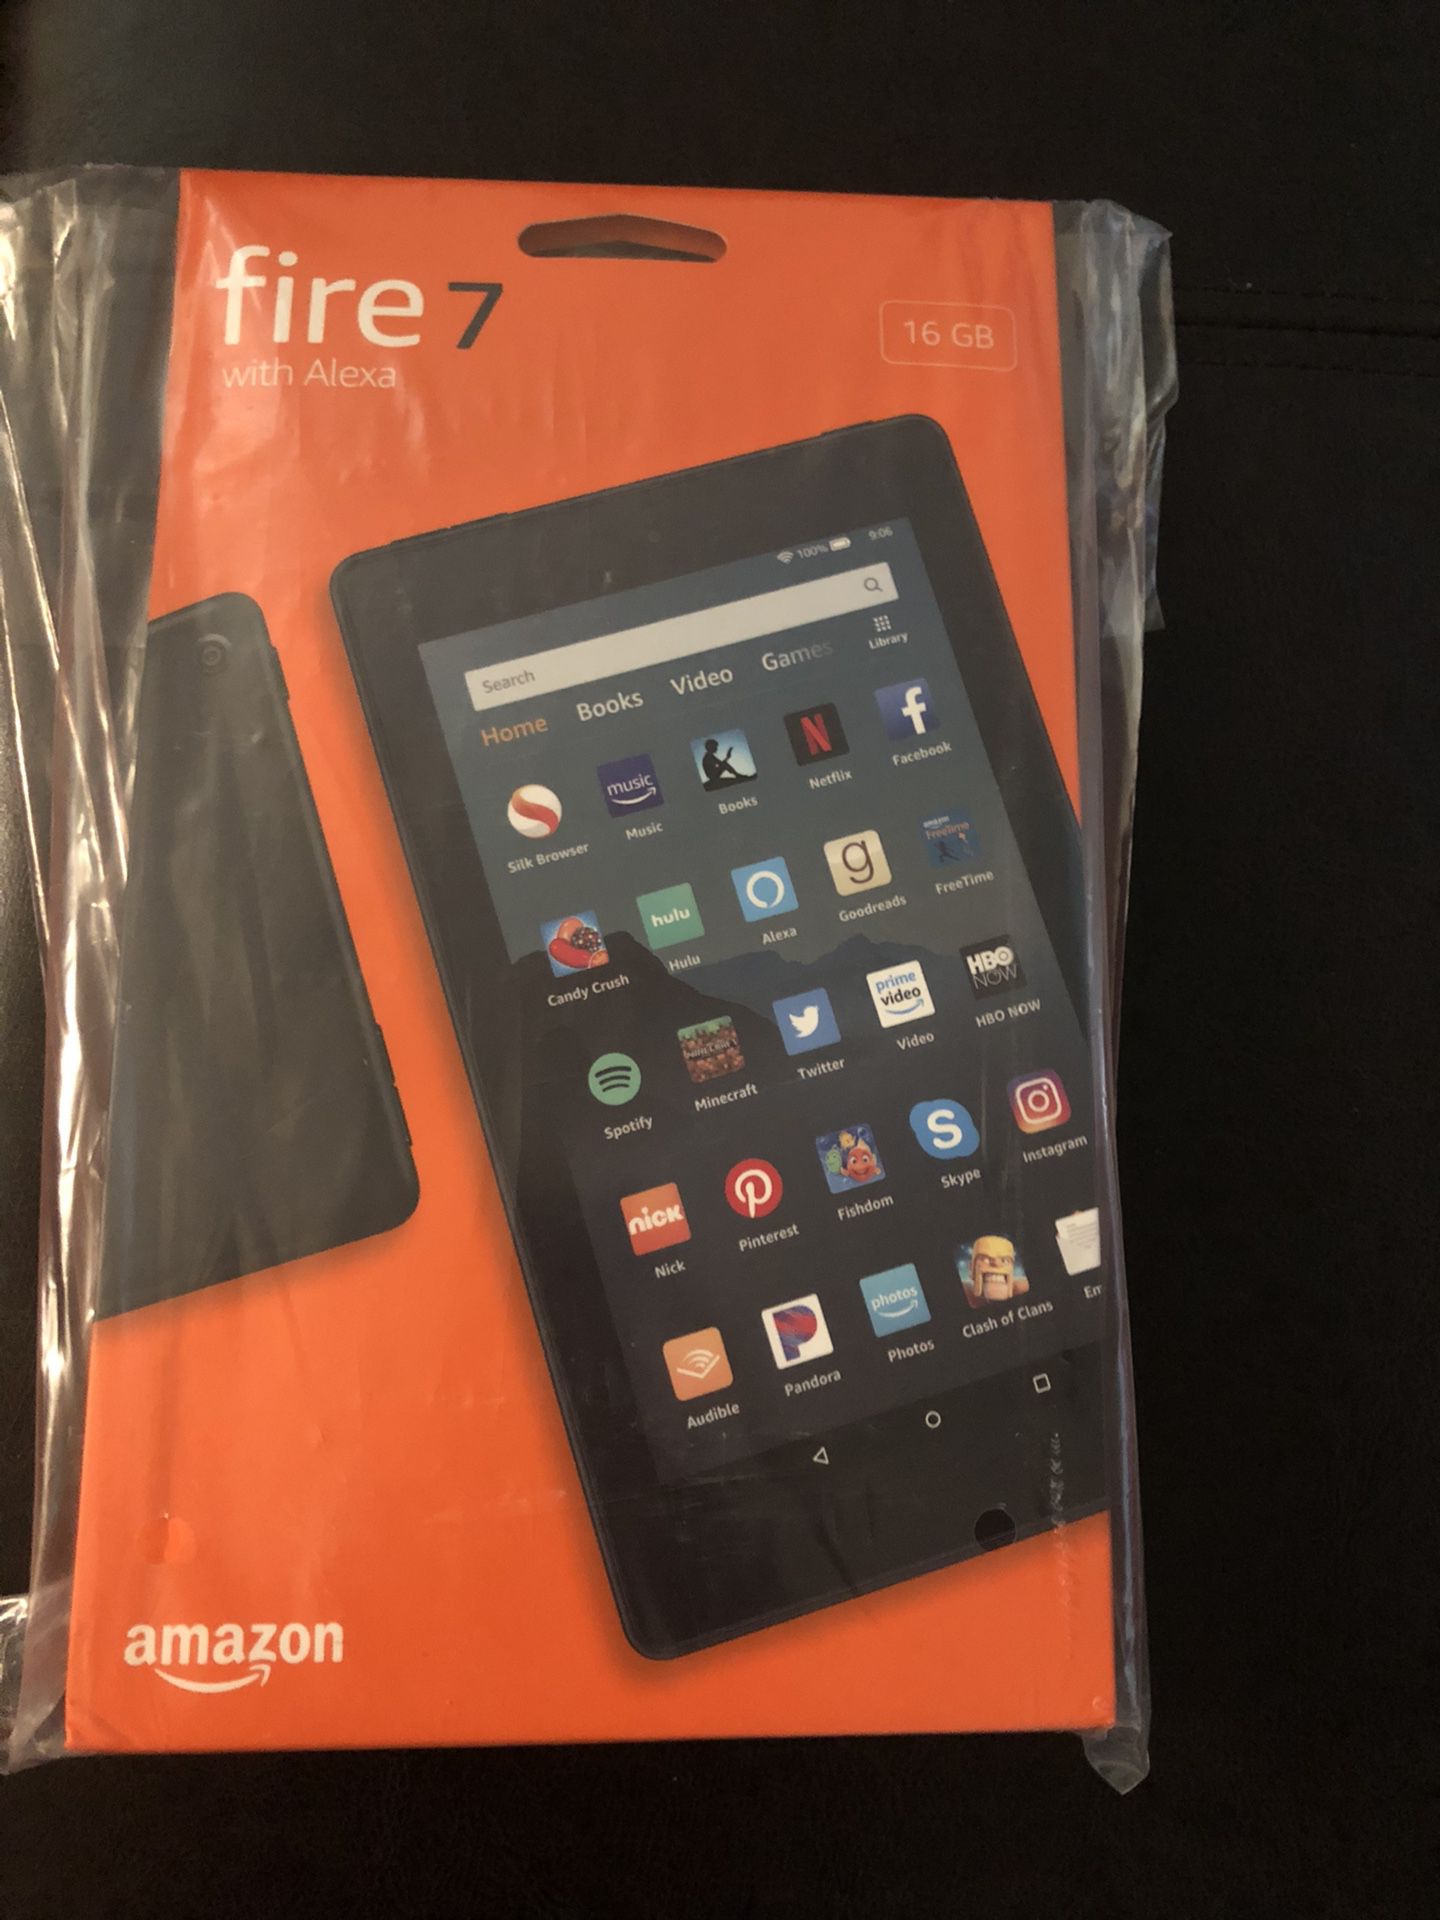 Tablet. Black fire 7 w Alexa new in box. Amazon power adapter, w built in rechargeable battery and more